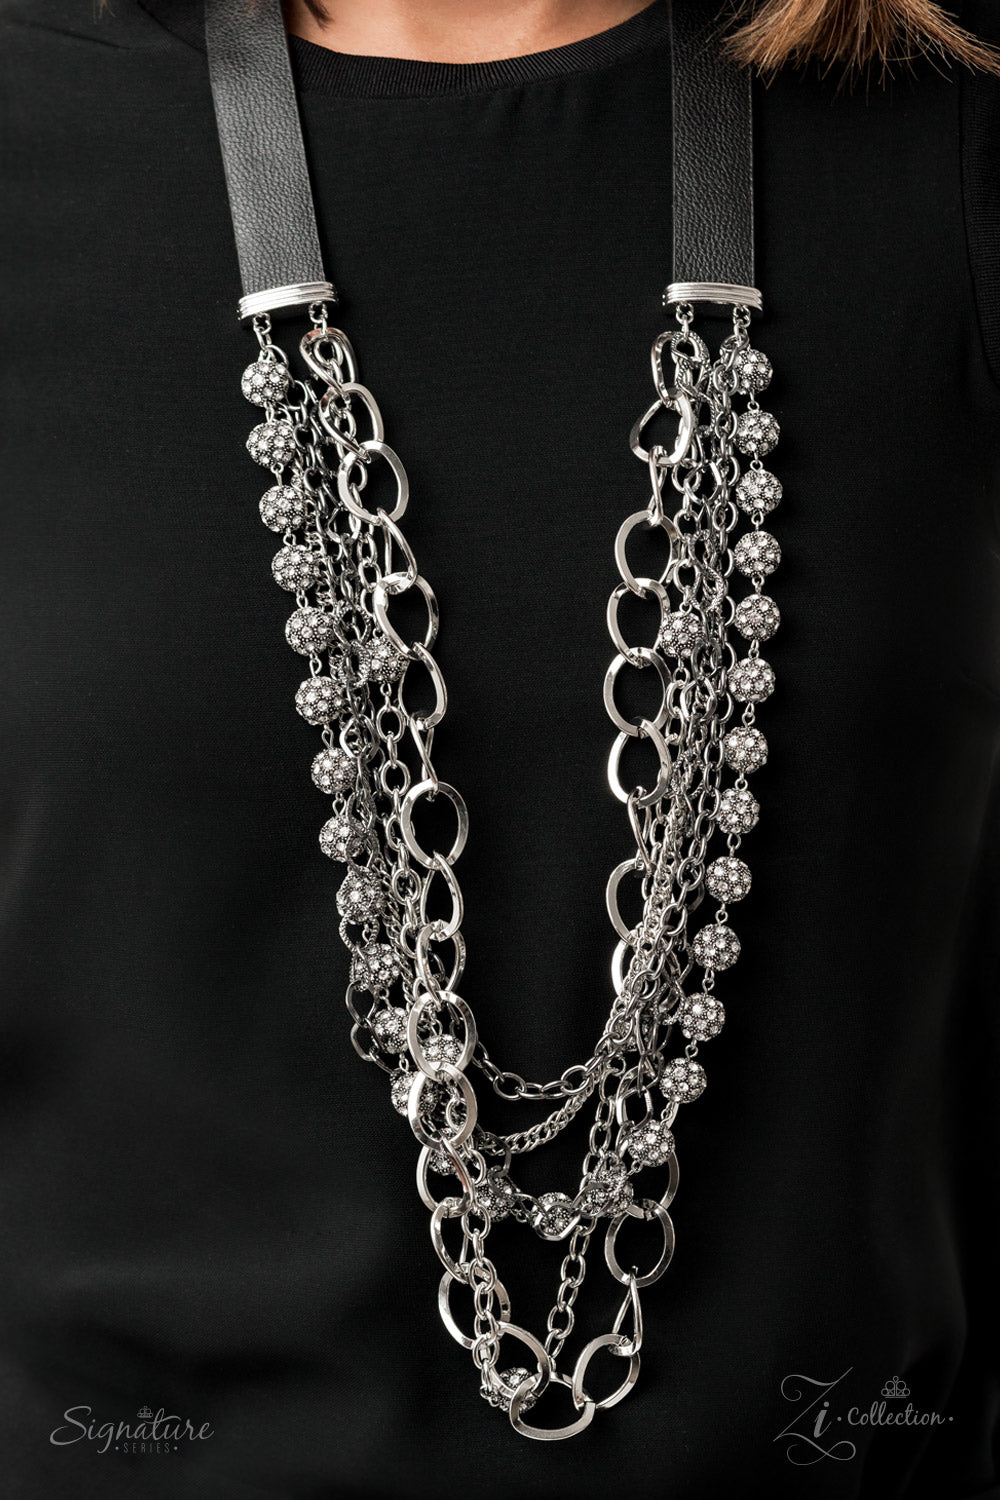 THE ARLINGTO - BLACK LEATHER SILVER CHAINS RHINESTONE BEADS 2020 ZI NECKLACE